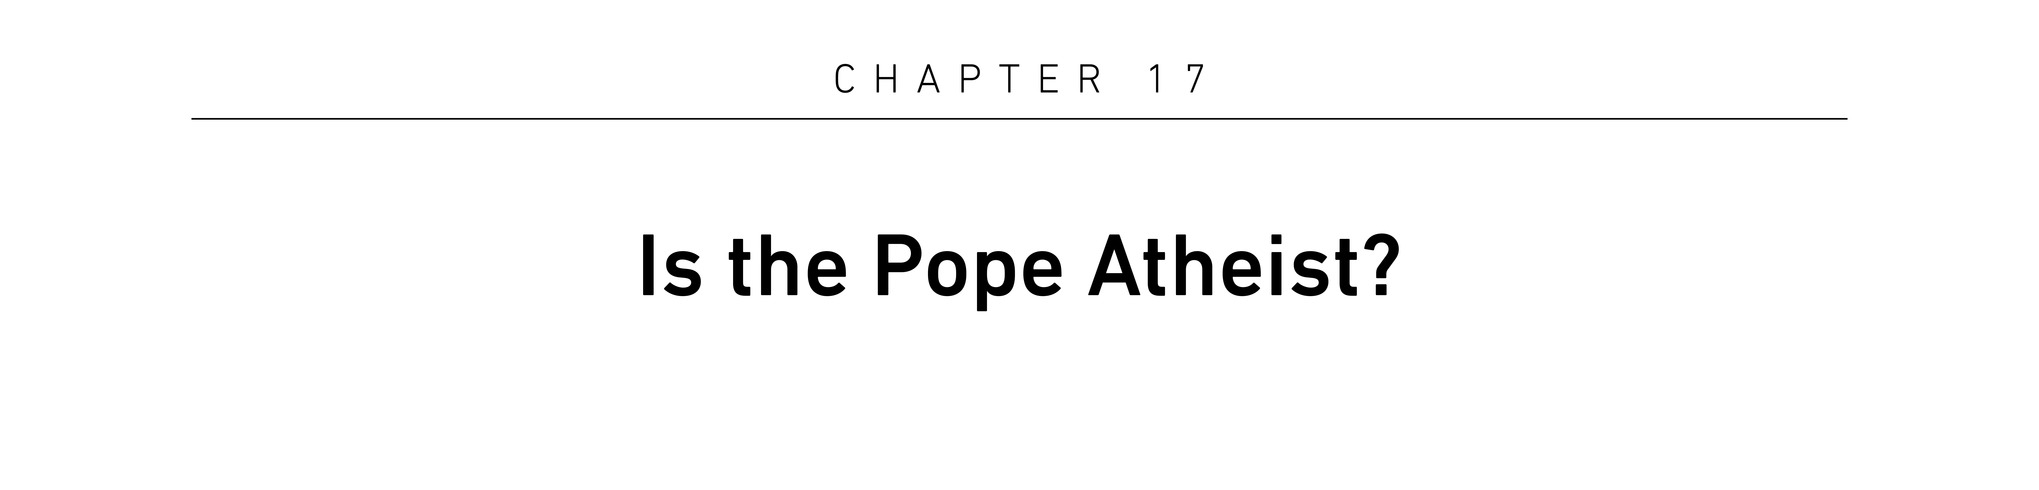 Chapter 17 Is the Pope Atheist?